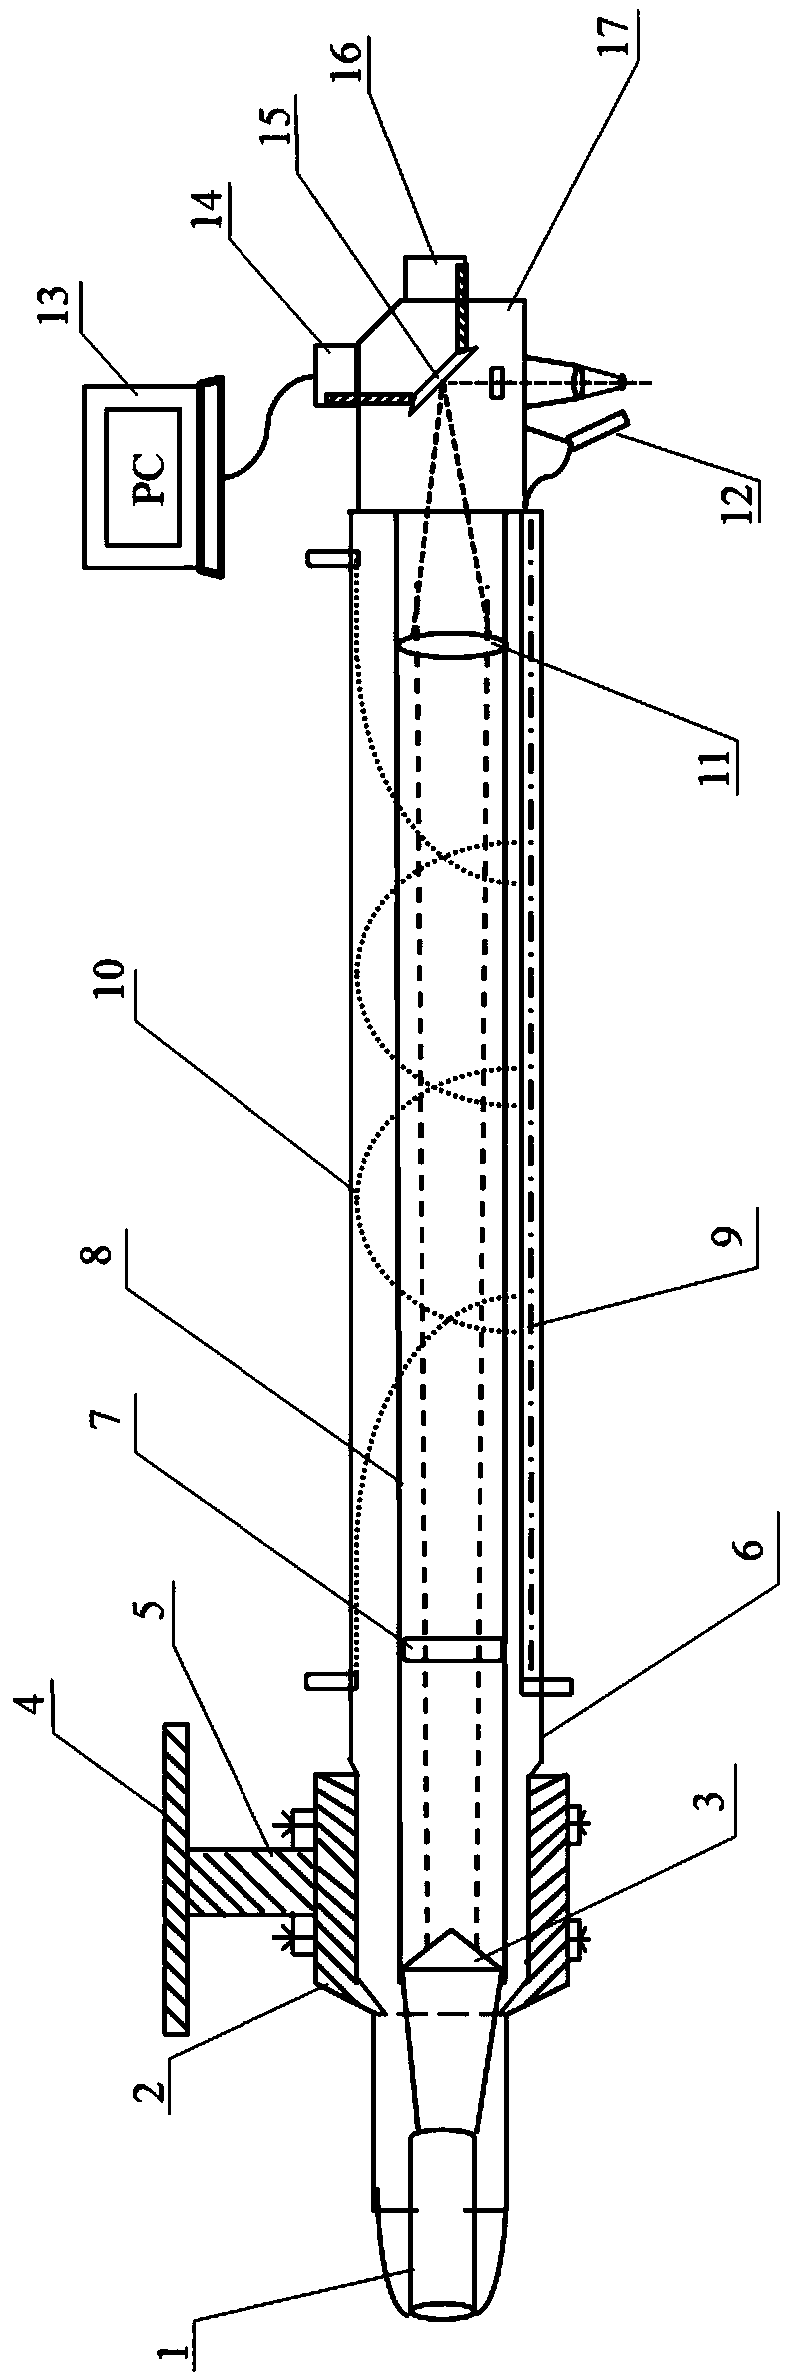 Laser cladding device for inner walls of medium-diameter and small-diameter pipelines